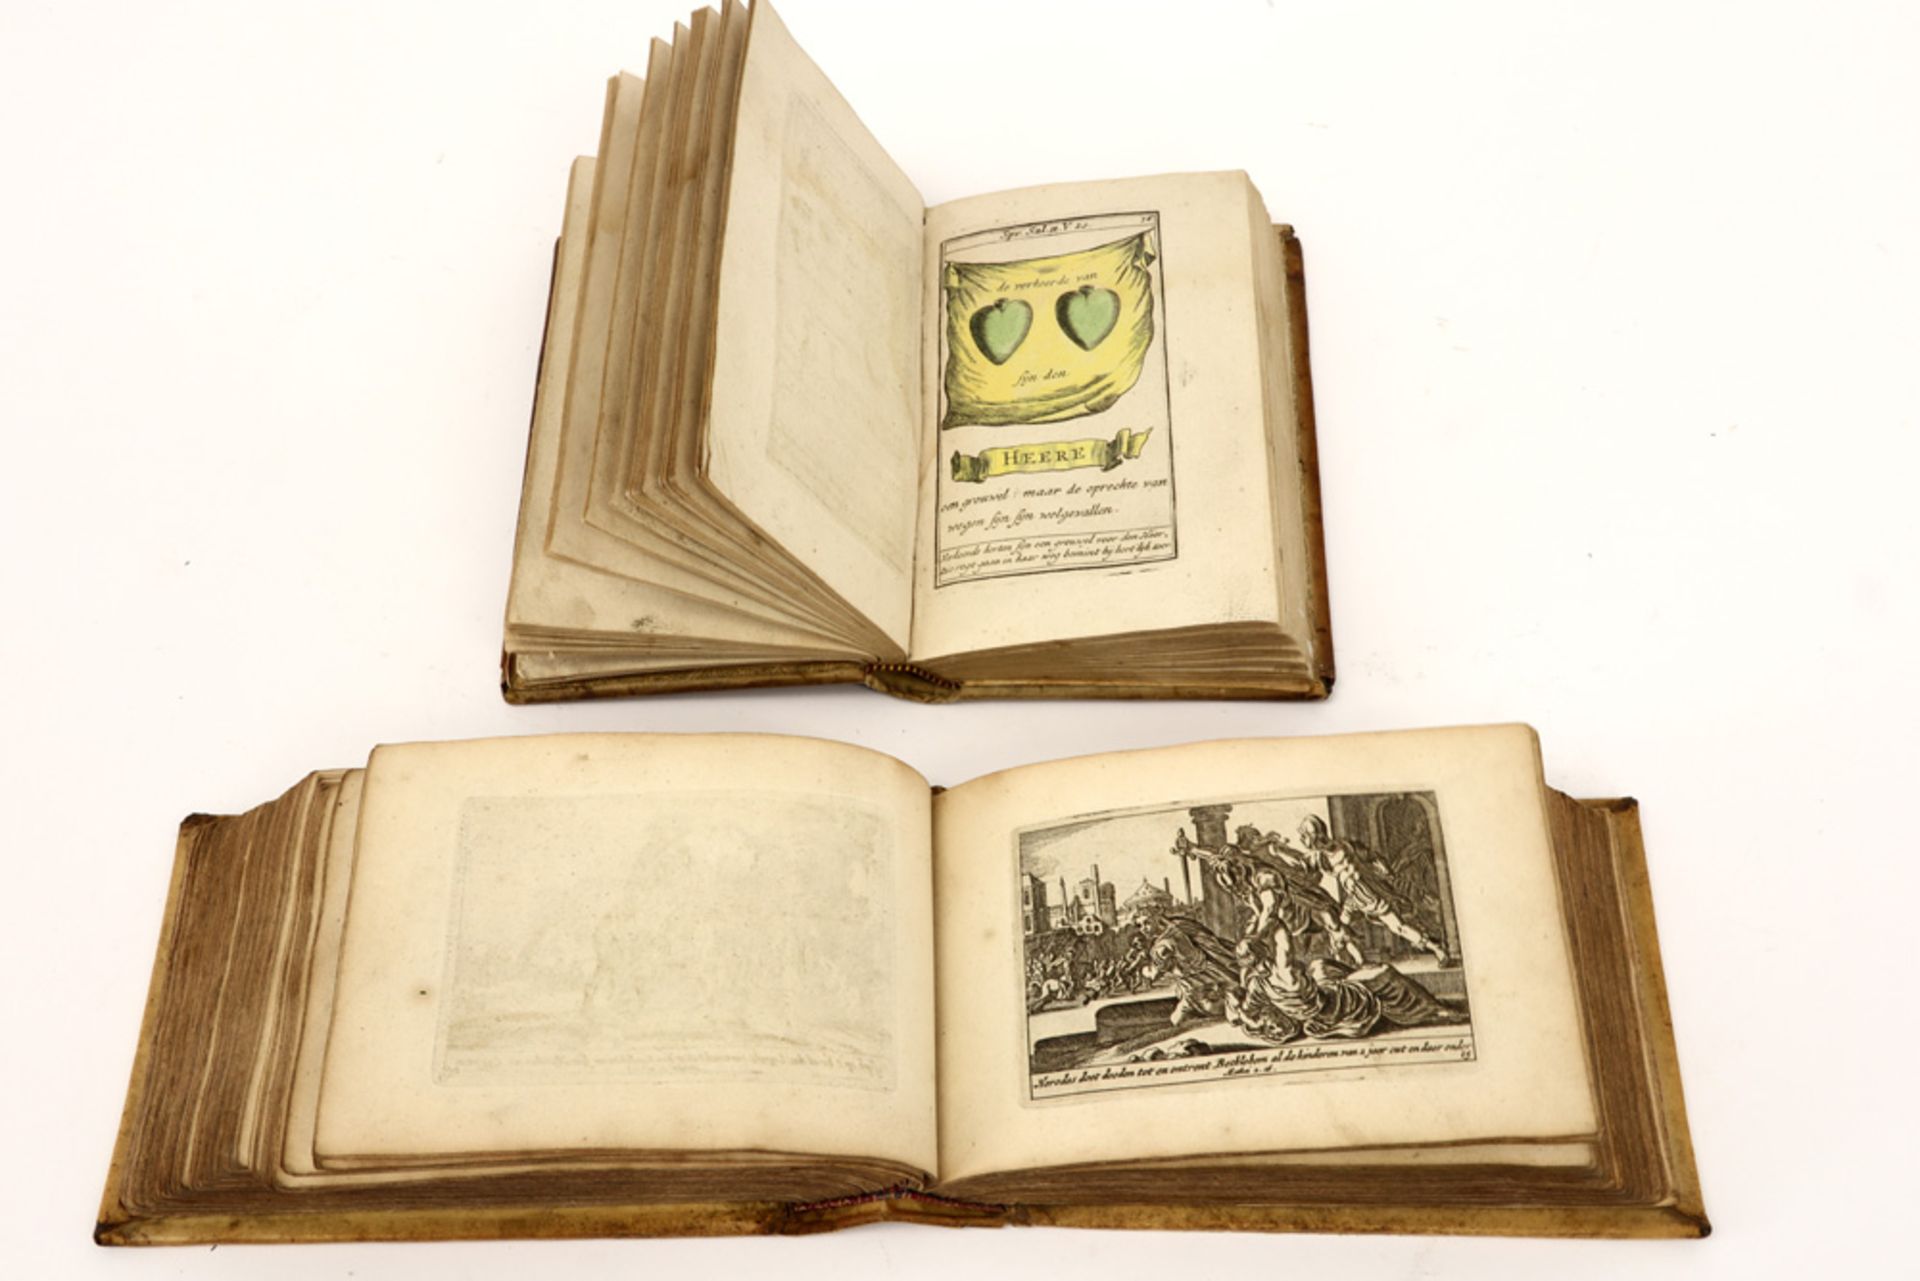 lot of two antique picture Bibles: - one published by Nicolaes Visscher with 144 (?) numbered - Image 5 of 6